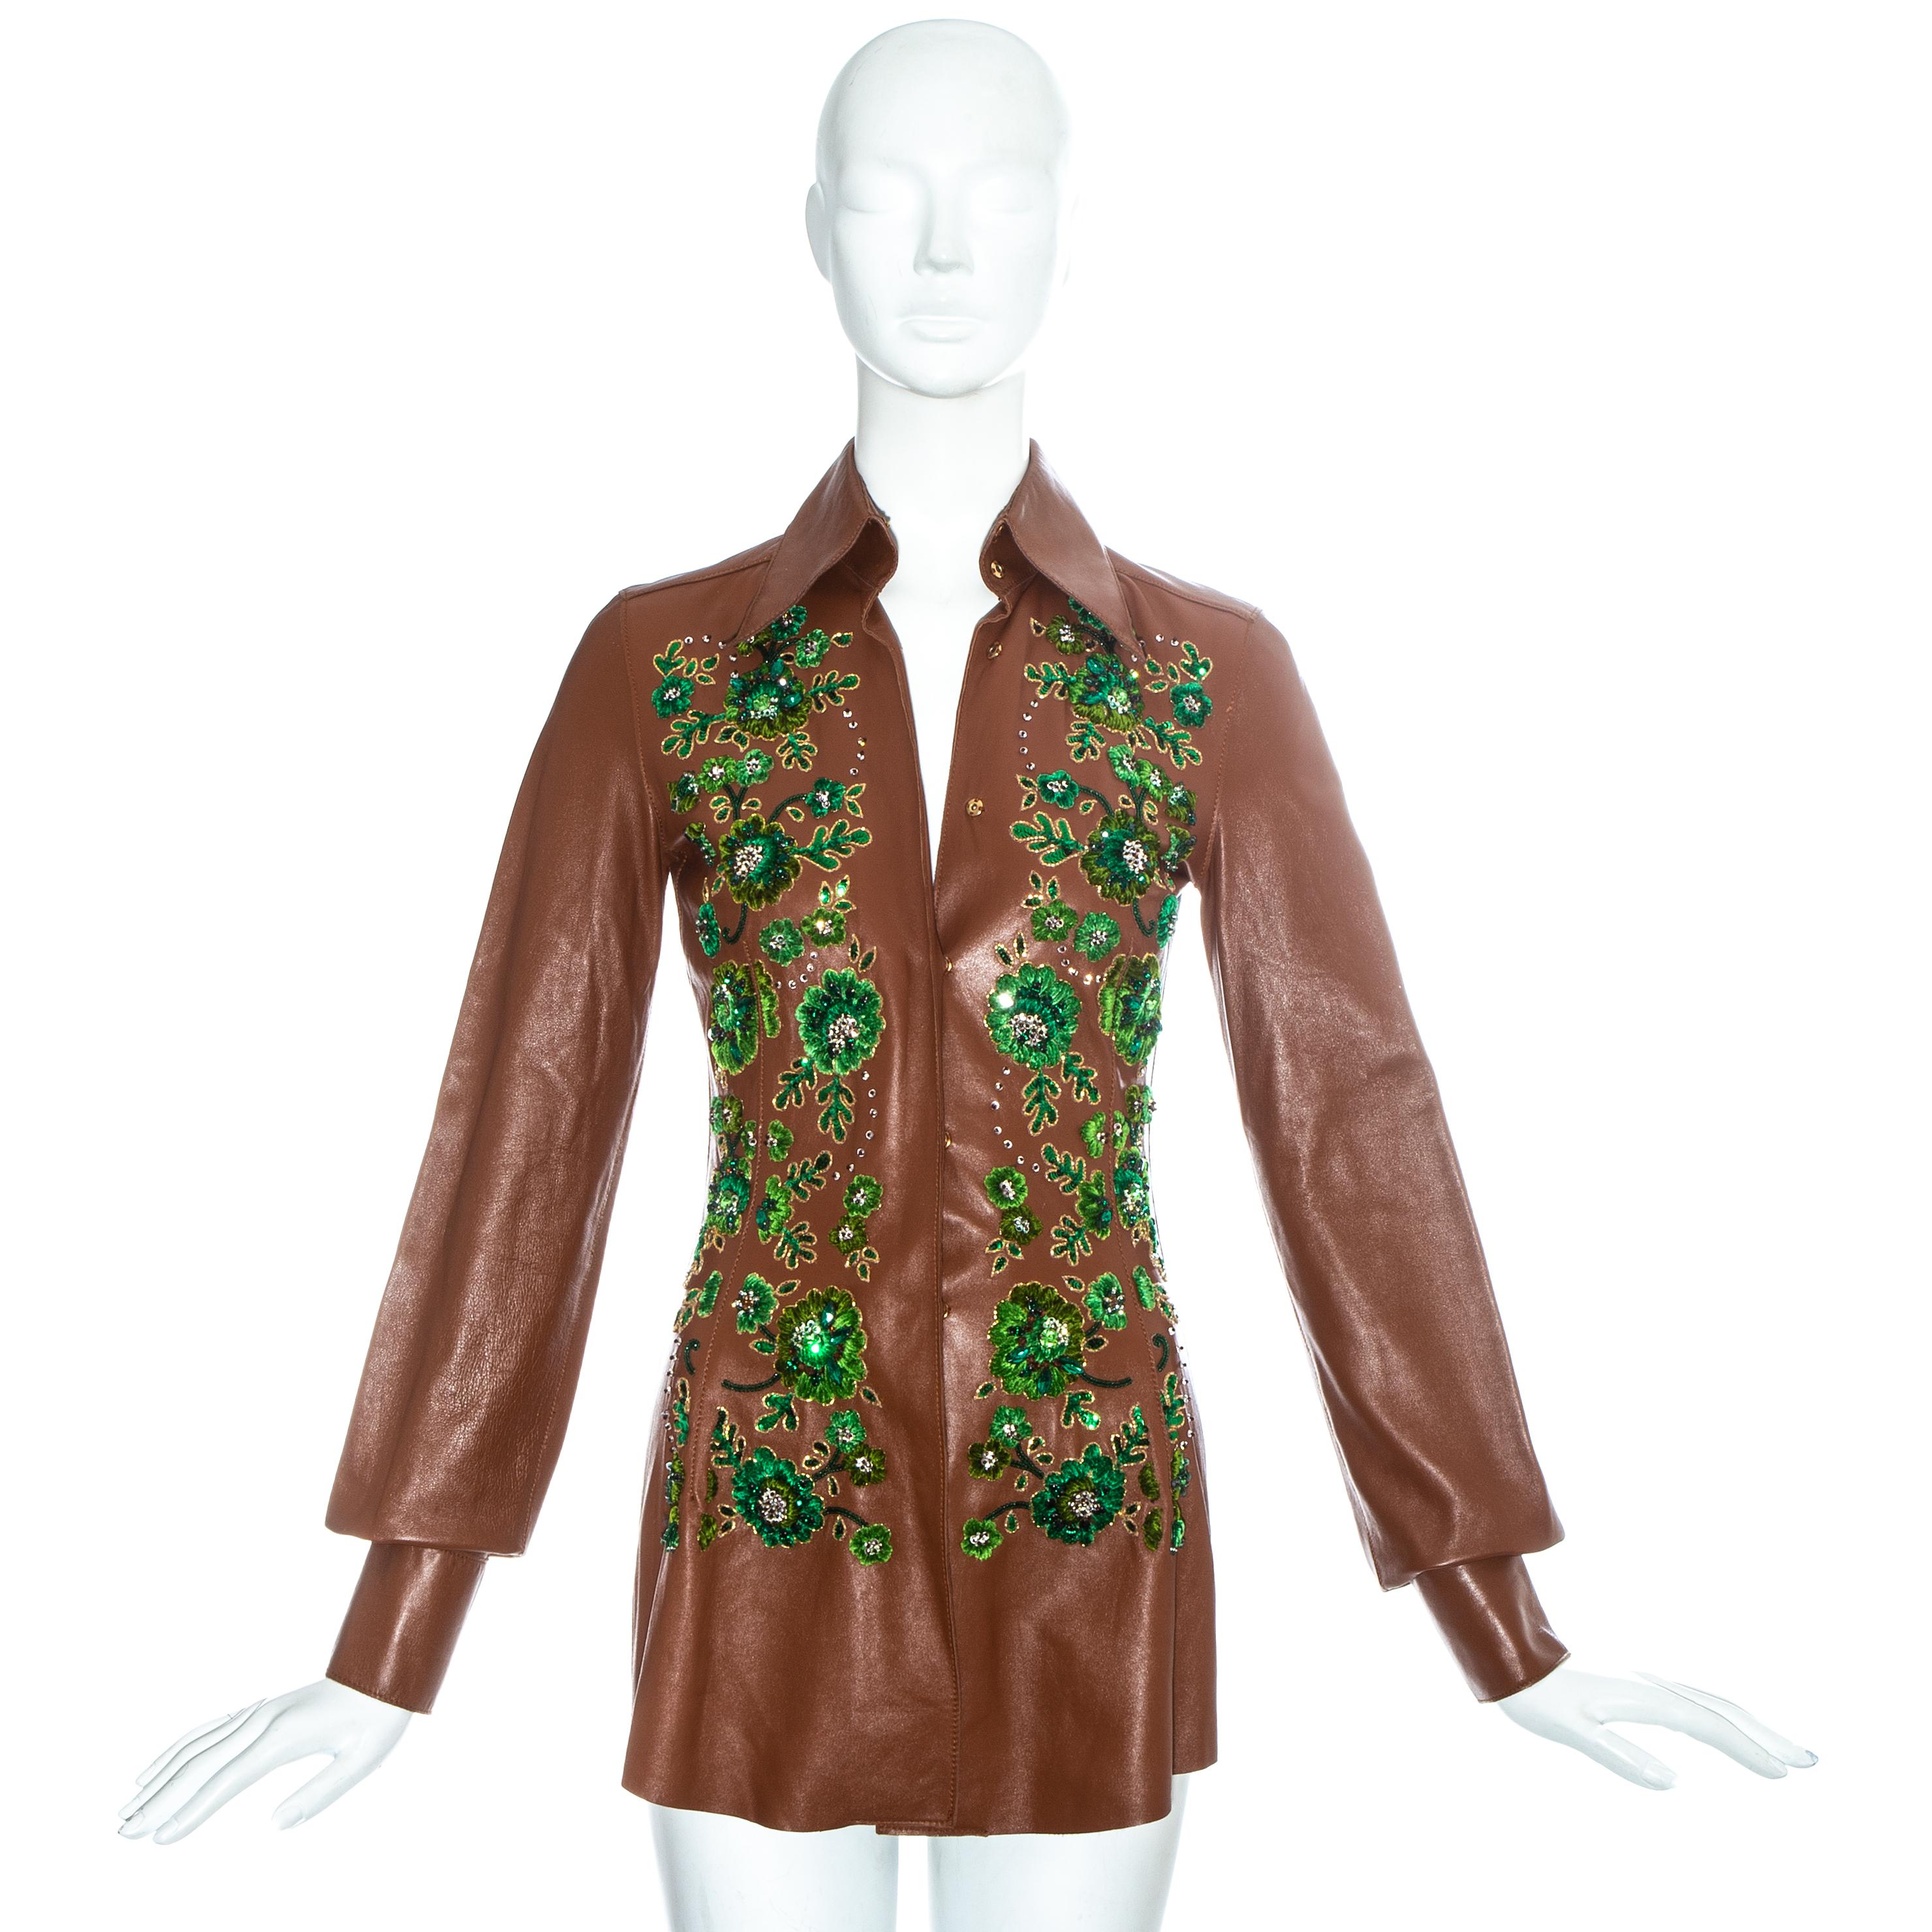 Dolce & Gabbana brown leather western style blouse with green embellishment.

Spring-Summer 2001